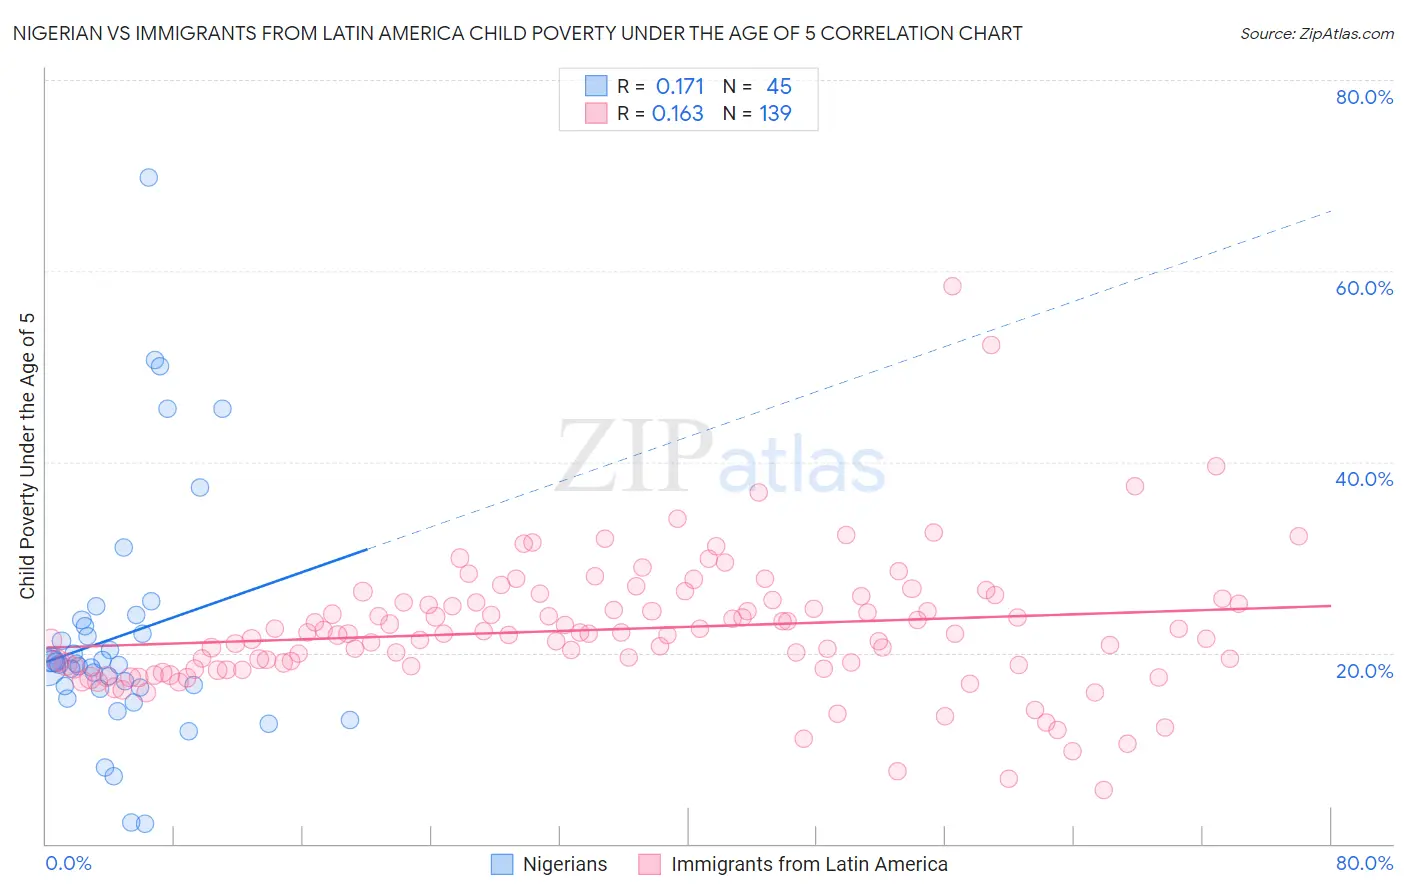 Nigerian vs Immigrants from Latin America Child Poverty Under the Age of 5